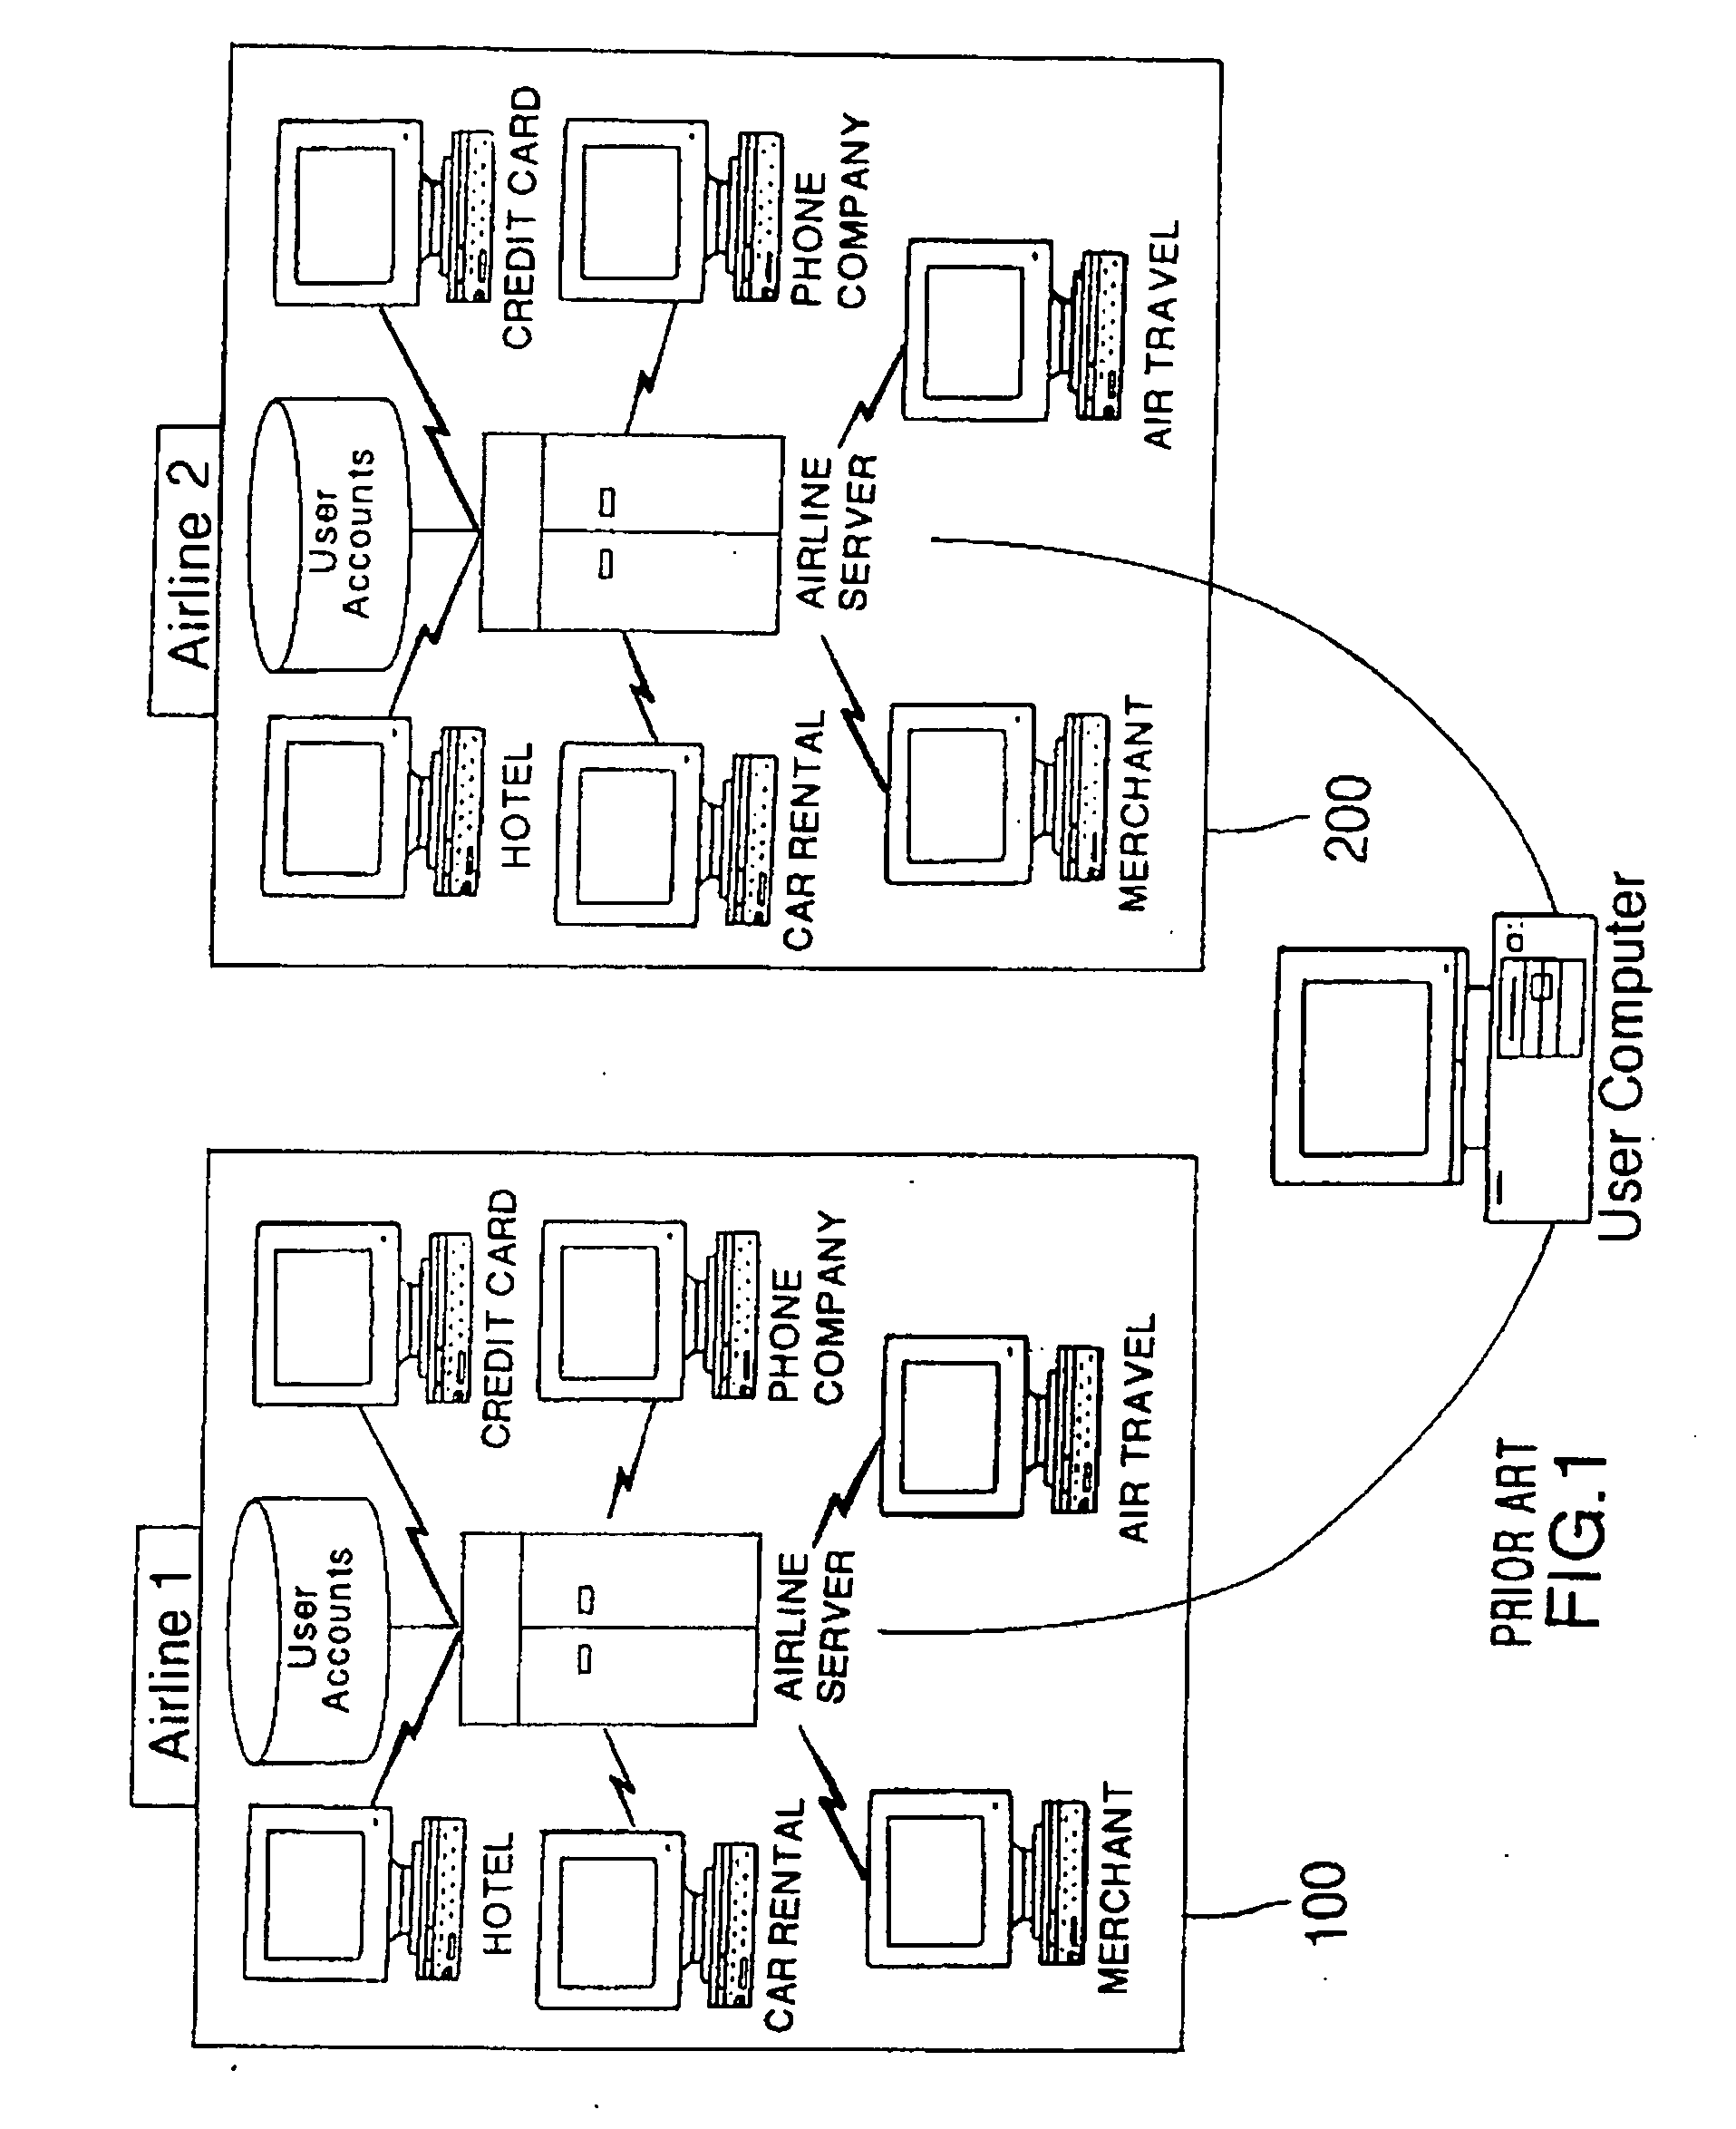 Method and system for issuing, aggregating and redeeming merchant loyalty points with an issuing bank